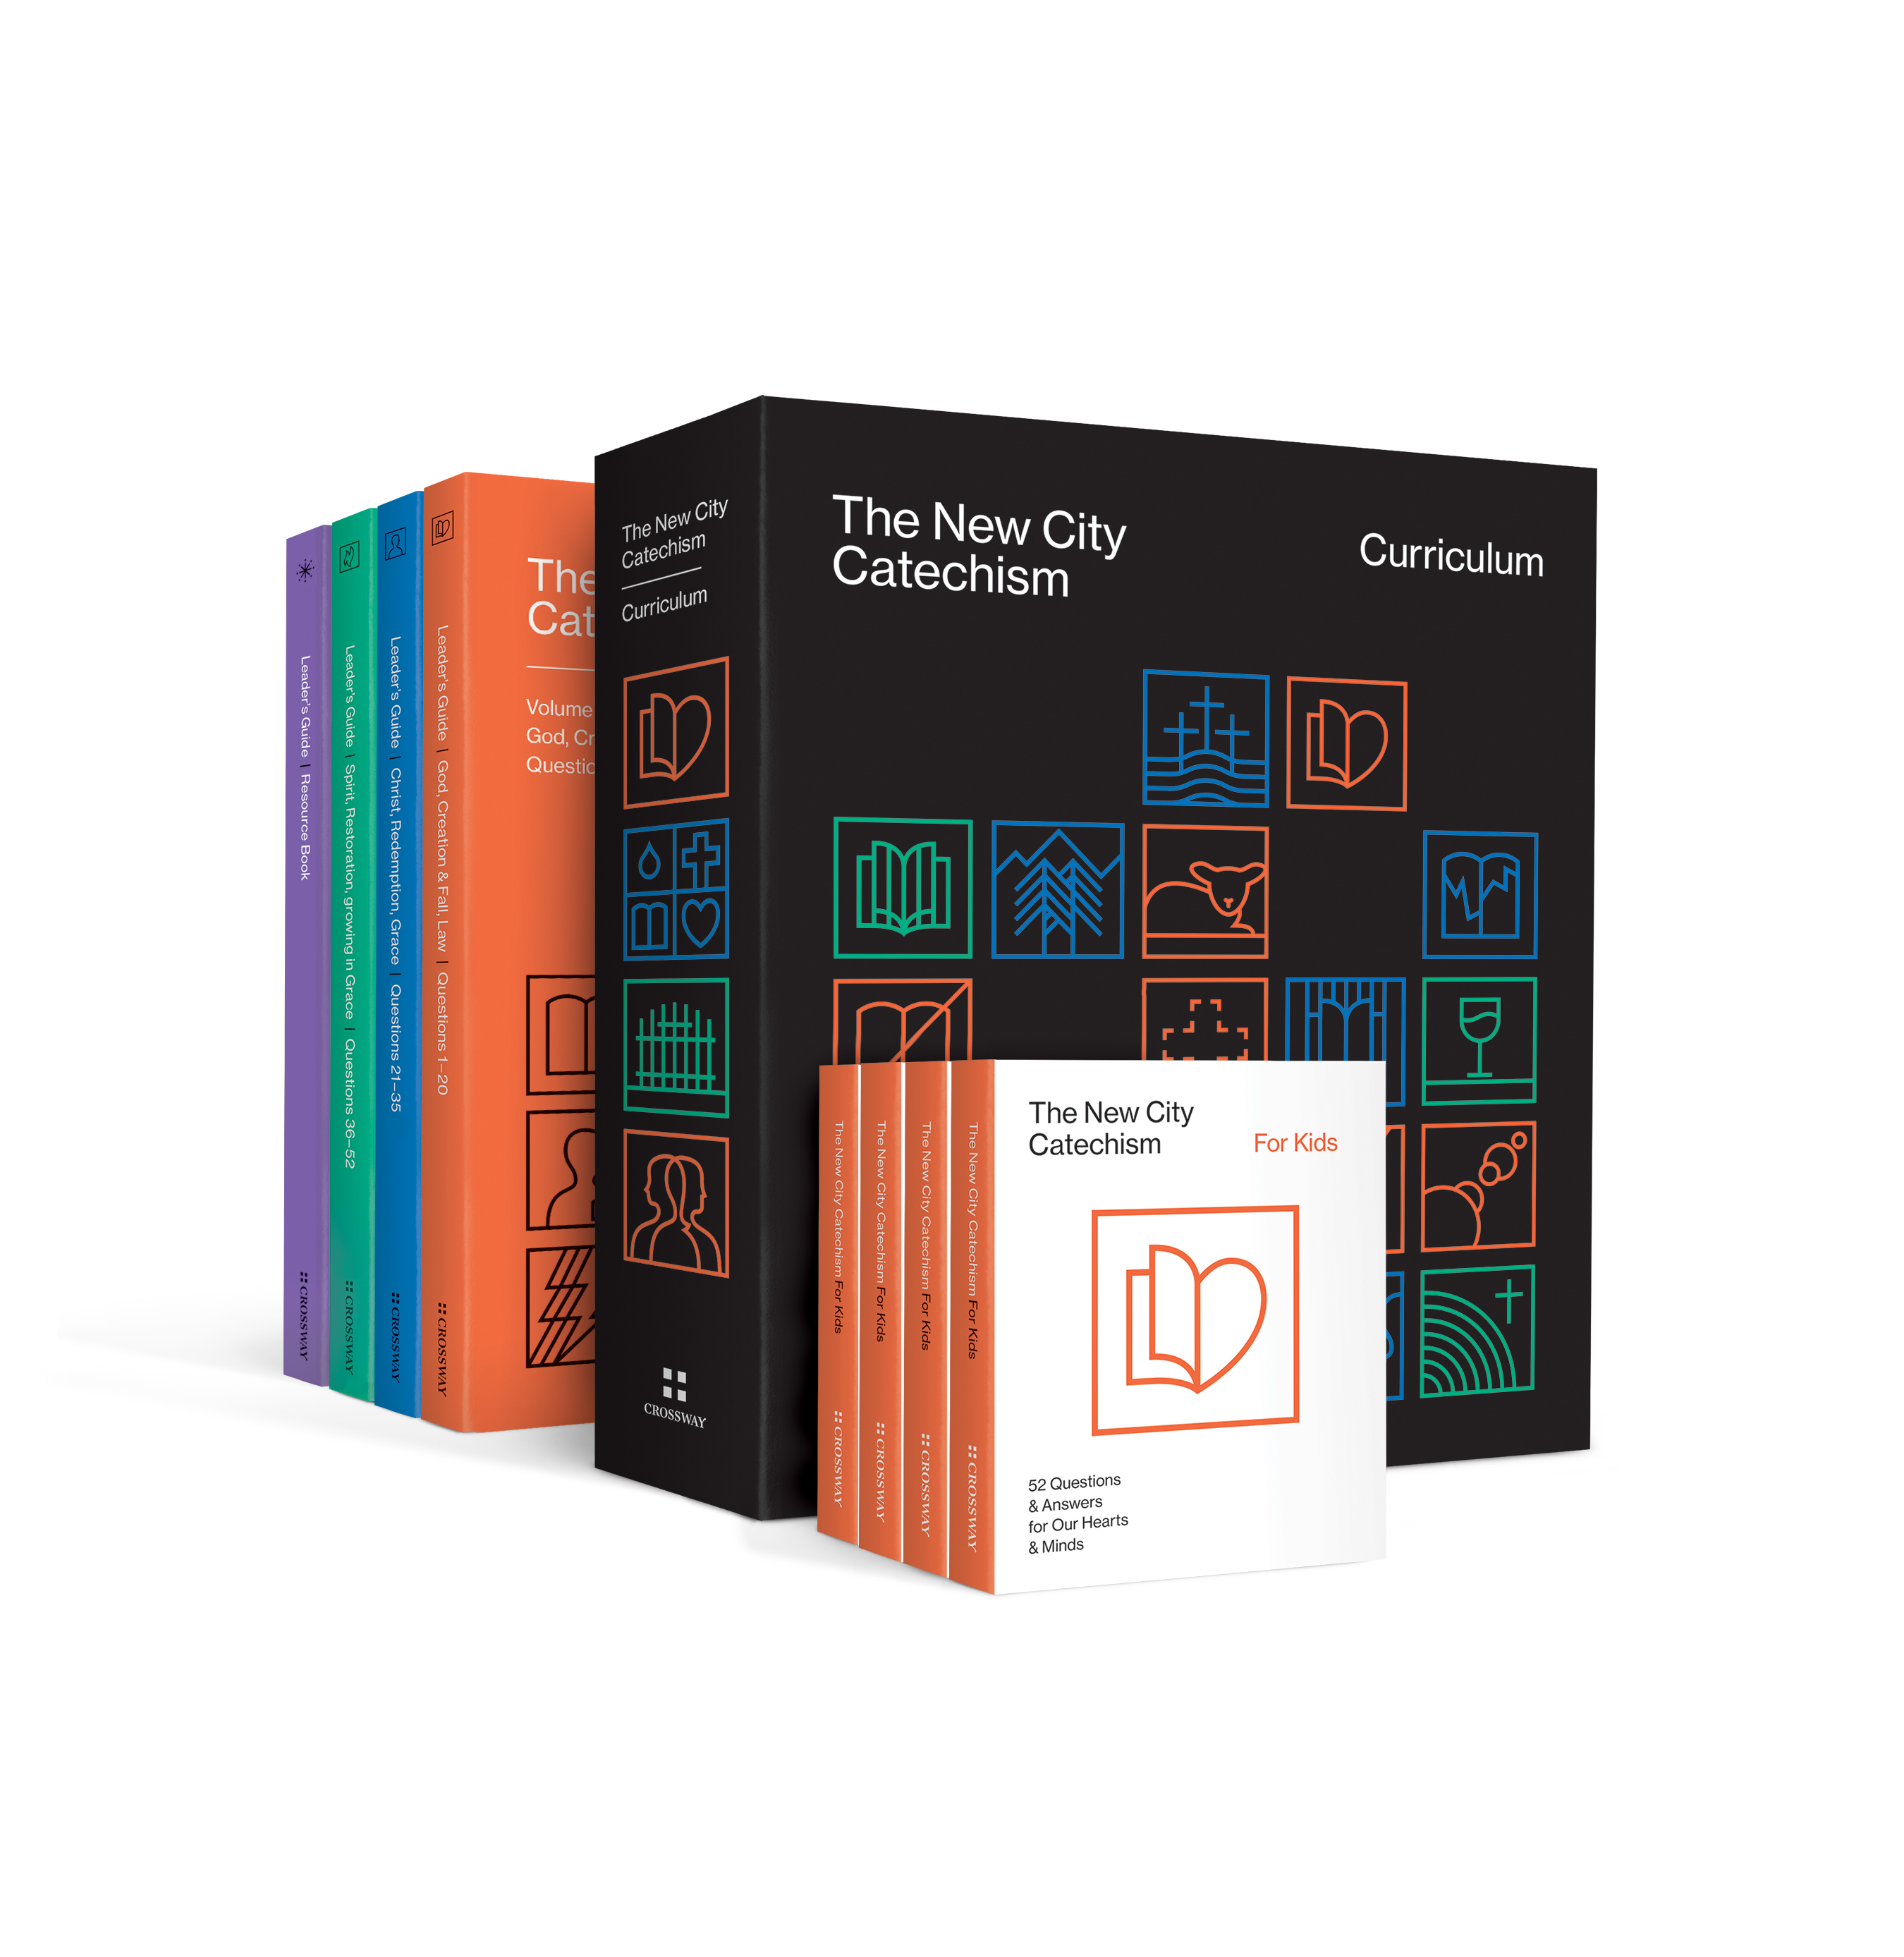 The New City Catechism Curriculum (Kit) | Free Delivery @ Eden.co.uk